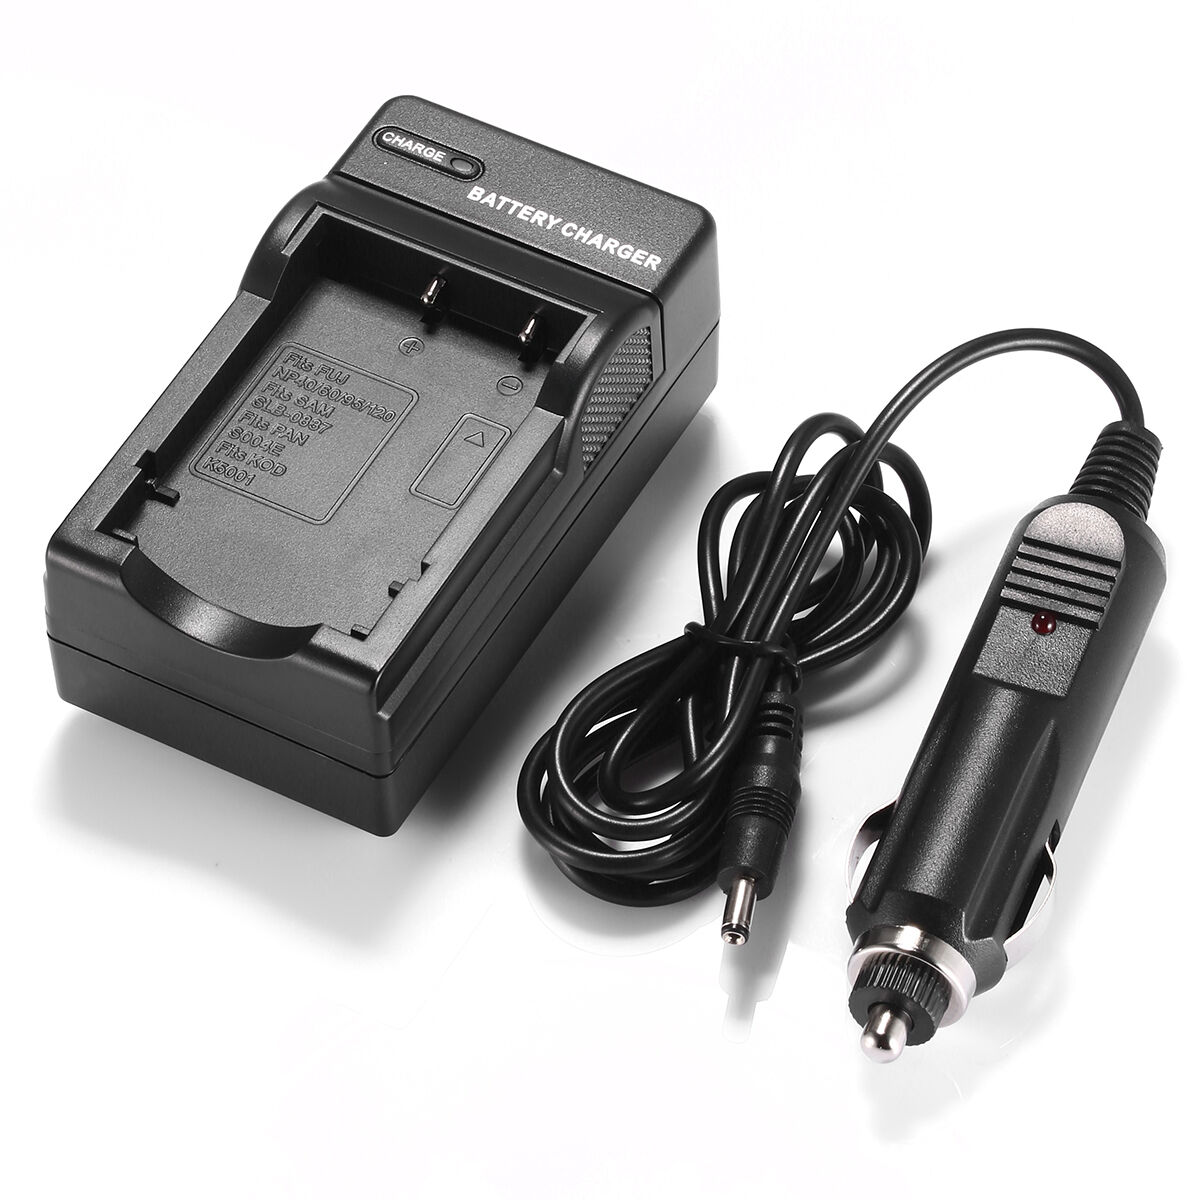 CASIO Exilim EX-S10RD battery charger